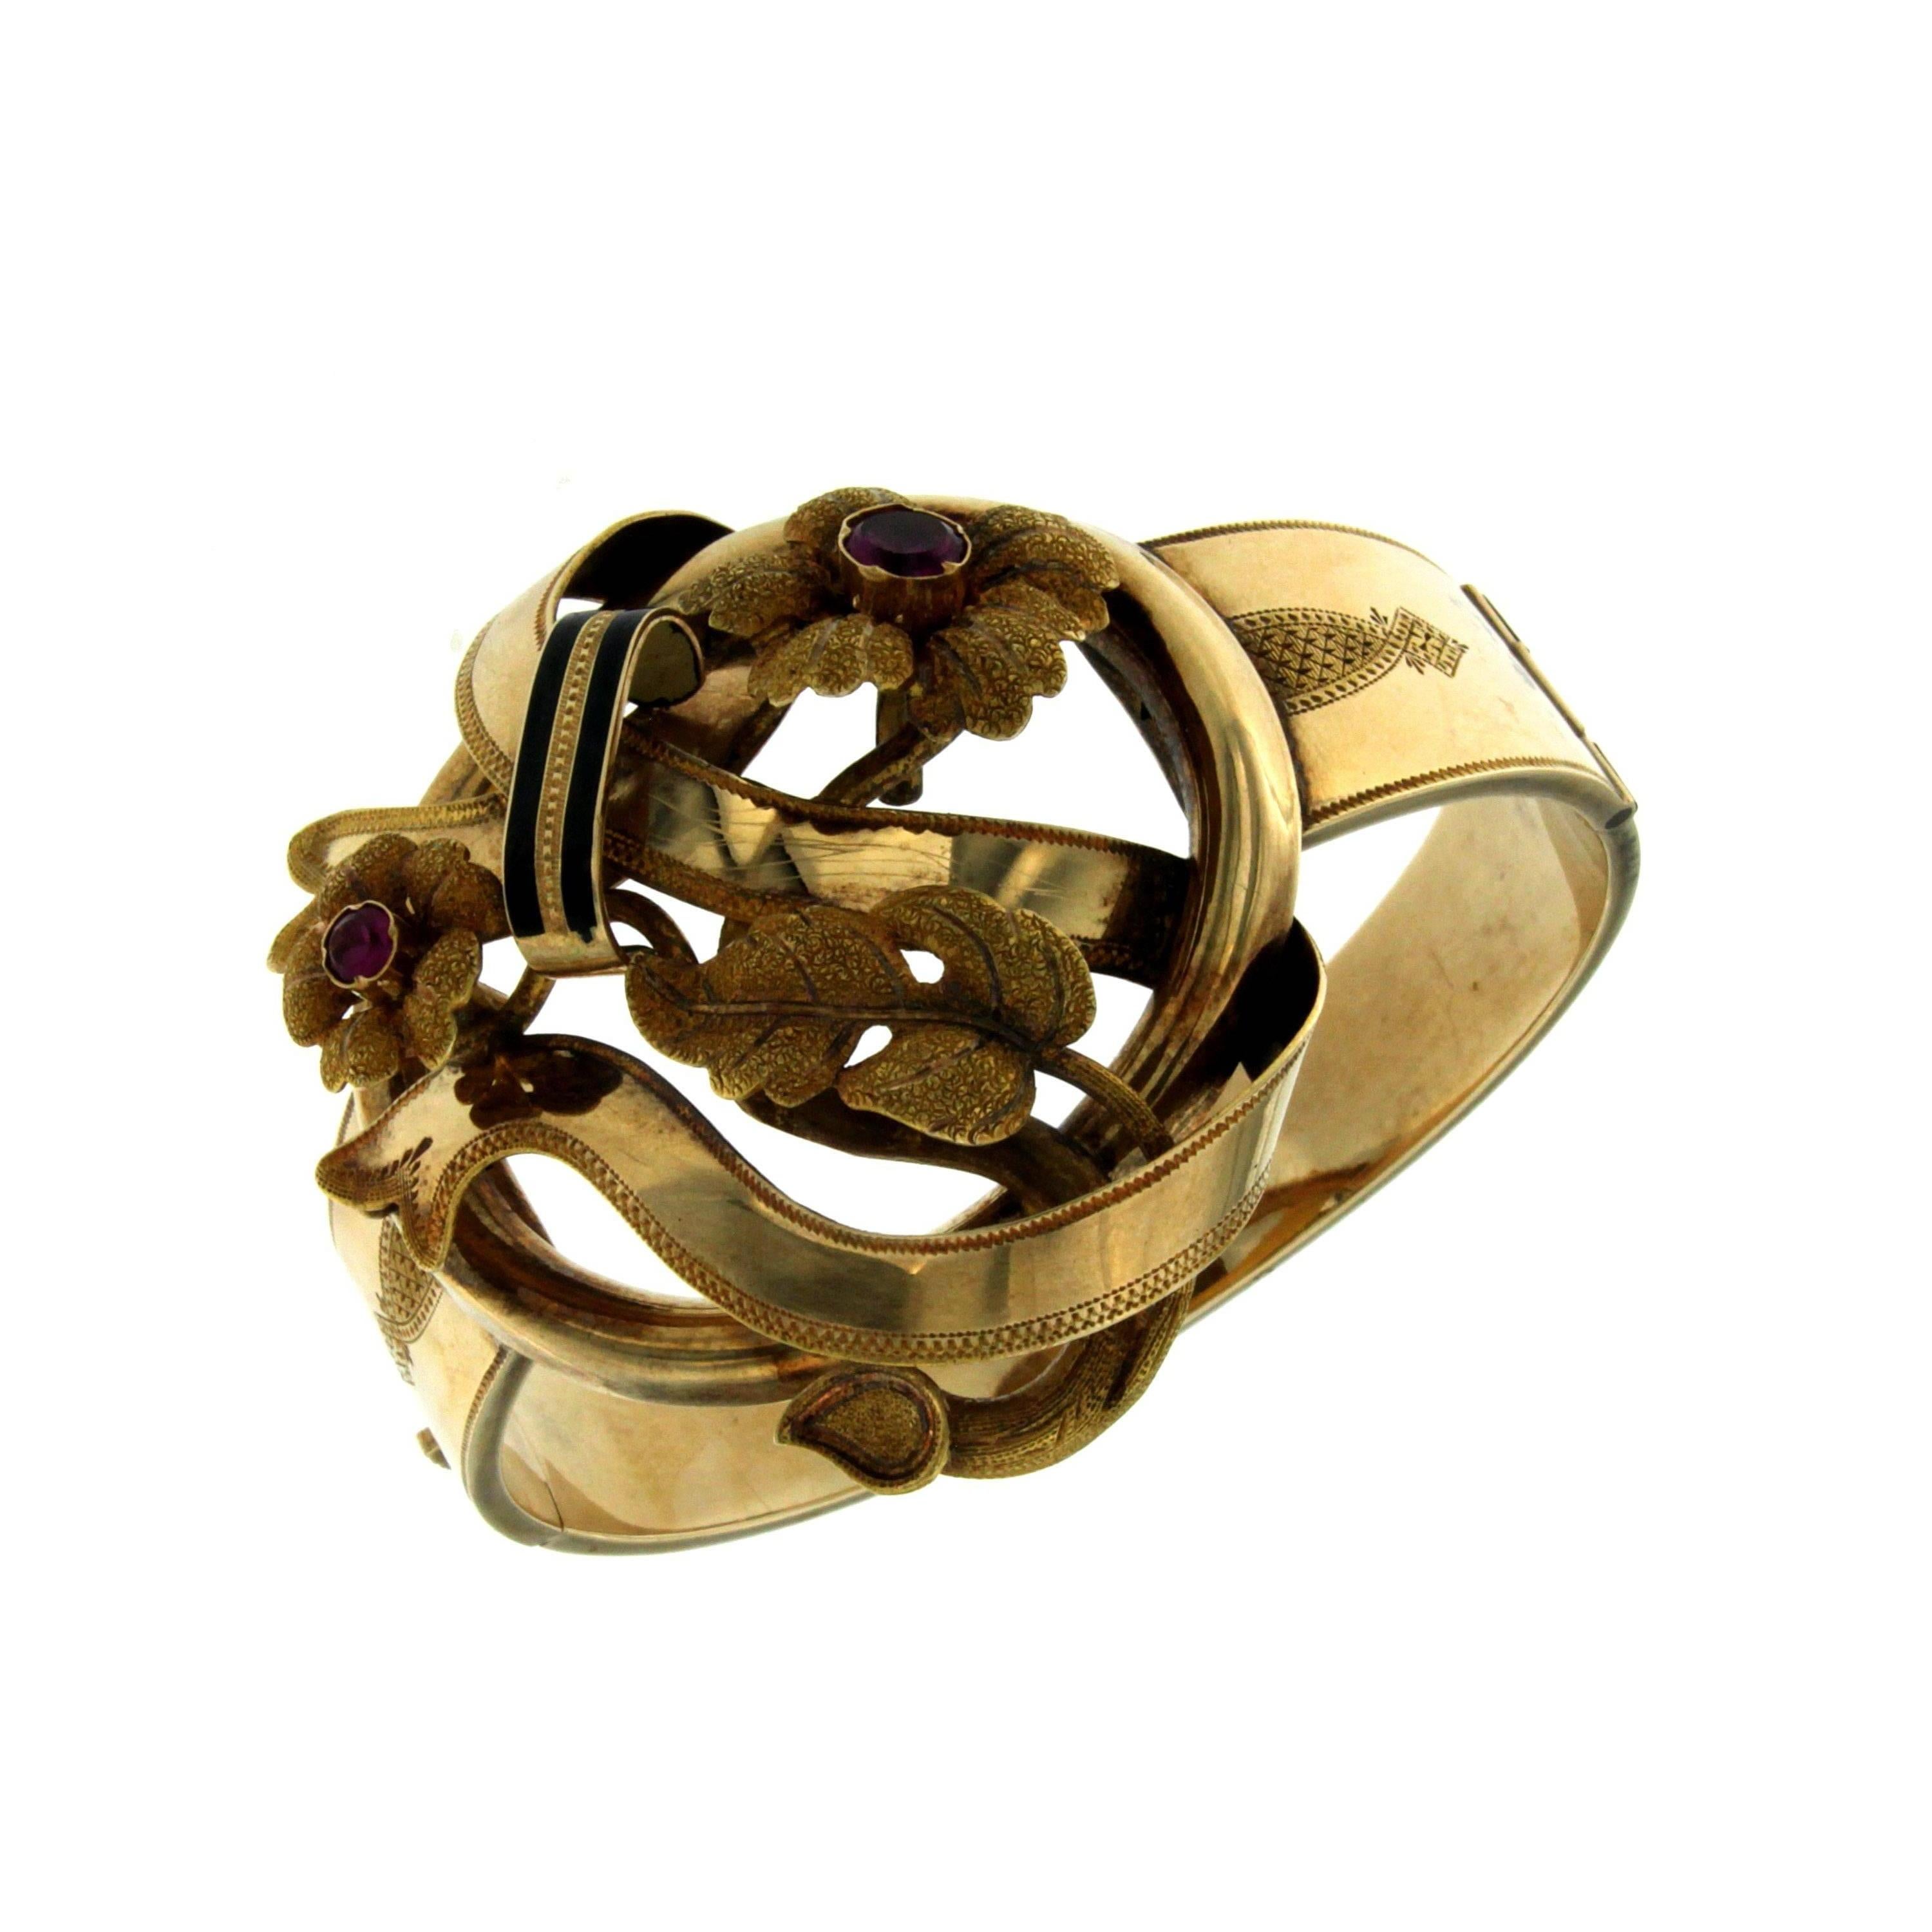 This gorgeous bangle bracelet with neoclassical engraved top is crafted in 14K yellow gold and weighs approx. 35.4 grams. It features beautiful shapes of flowers and leaves adorned by two purple glass stones.
Secure catch. 
Diameter: 6.50 cm